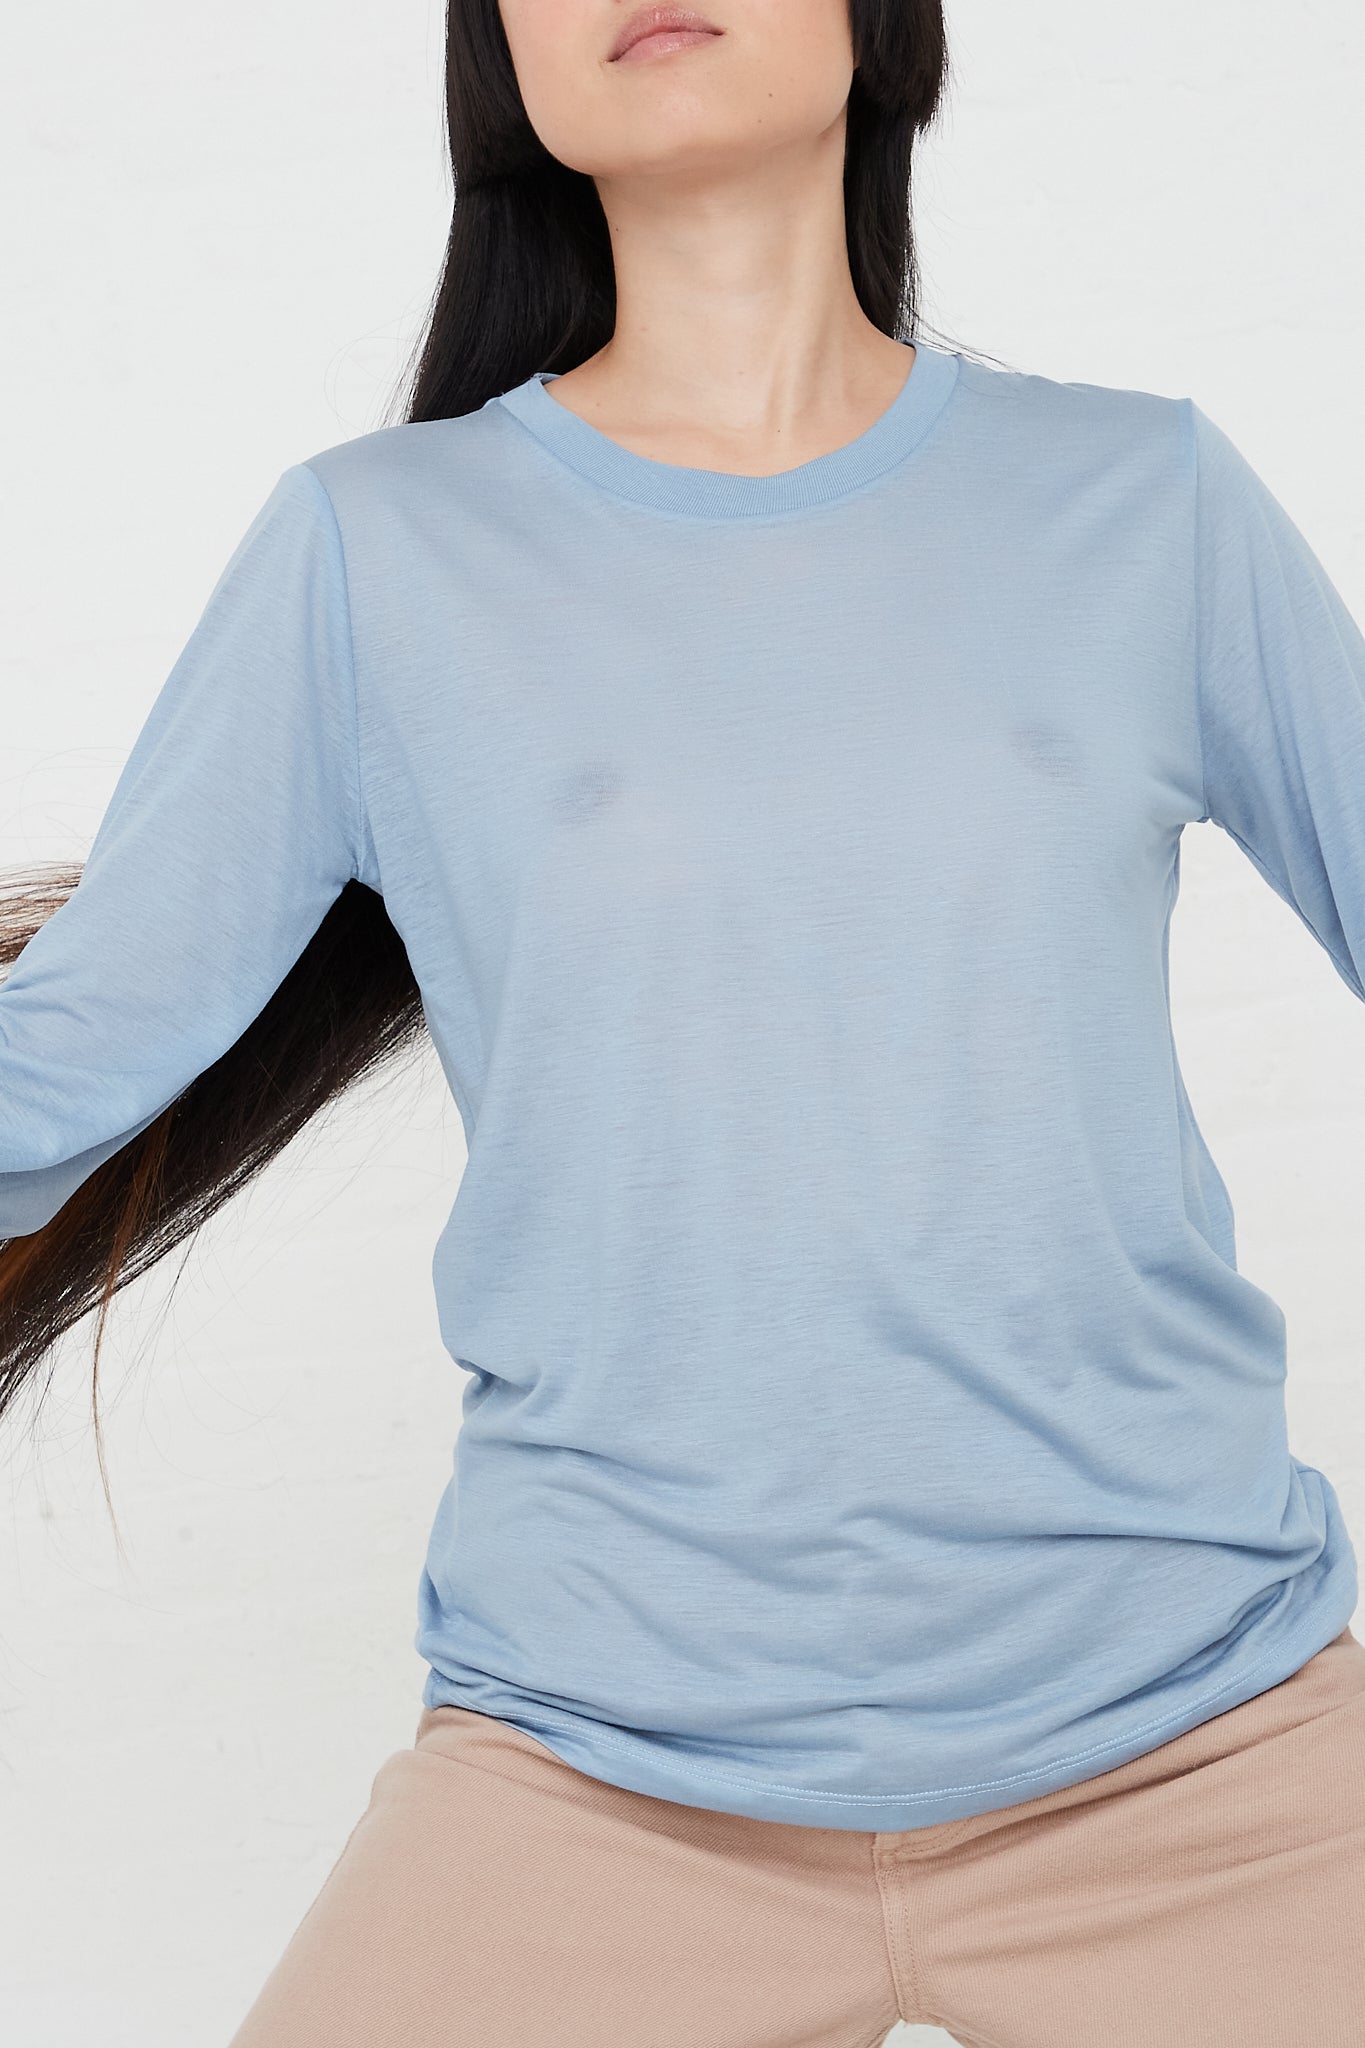 Long Sleeve Tee in Mixi Blue by Baserange  for Oroboro Front Upclose